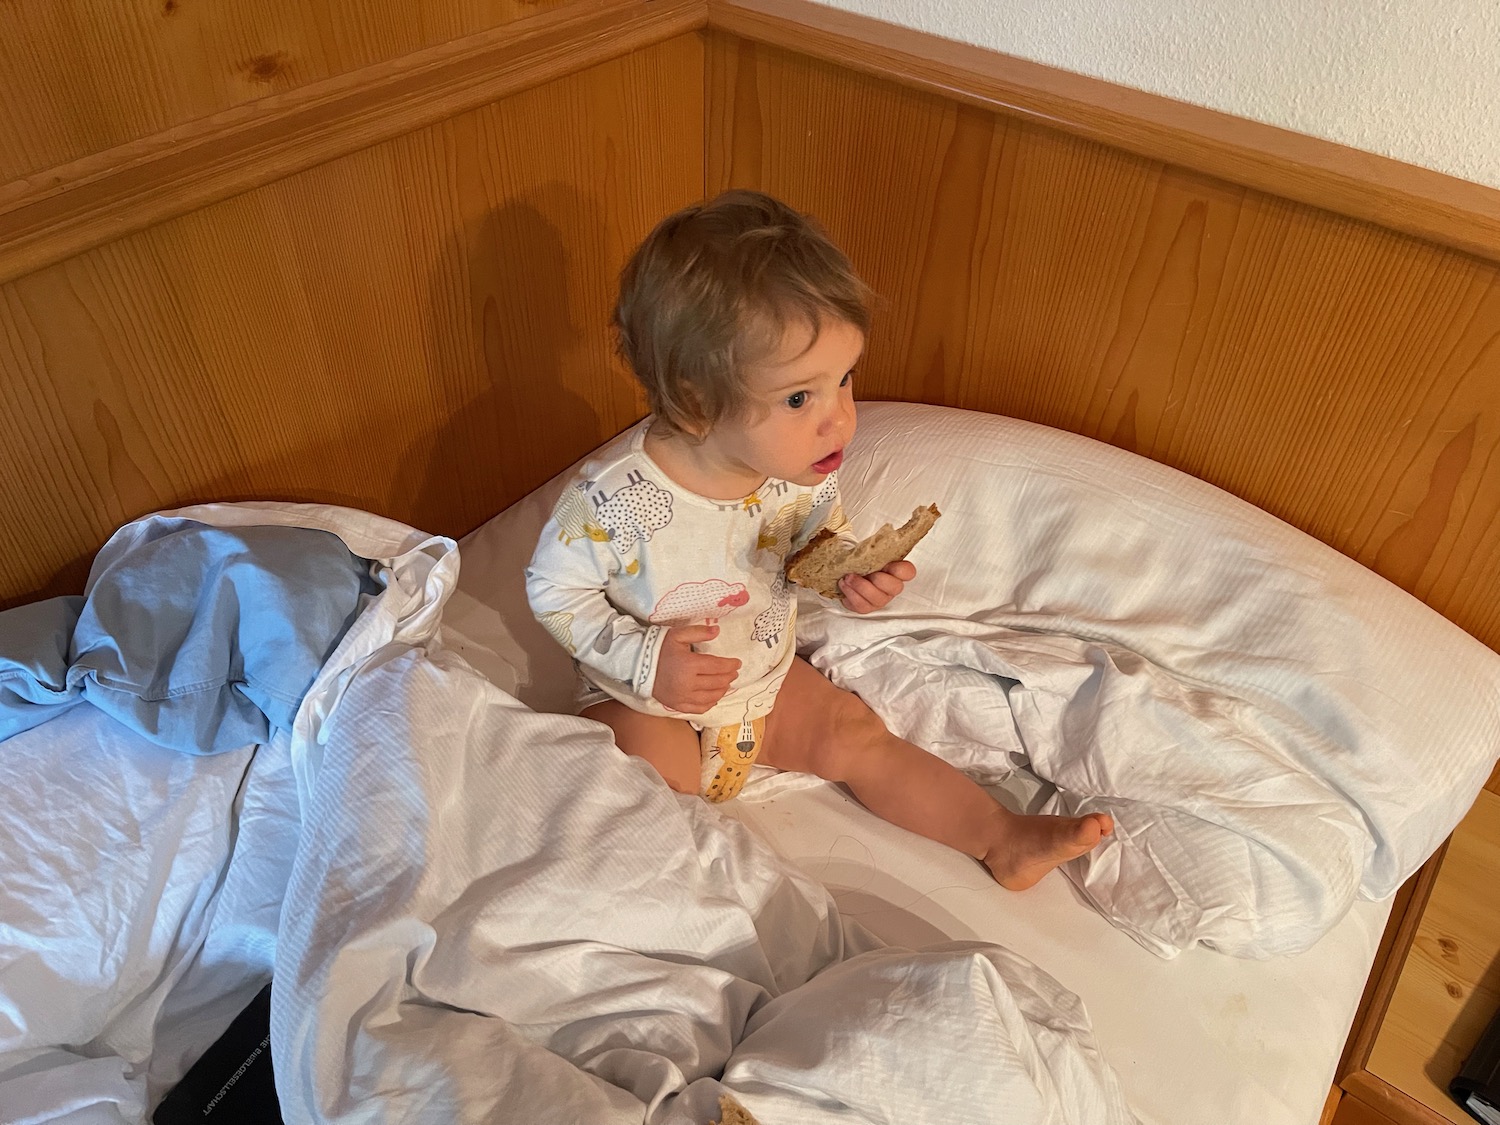 a baby eating food on a bed